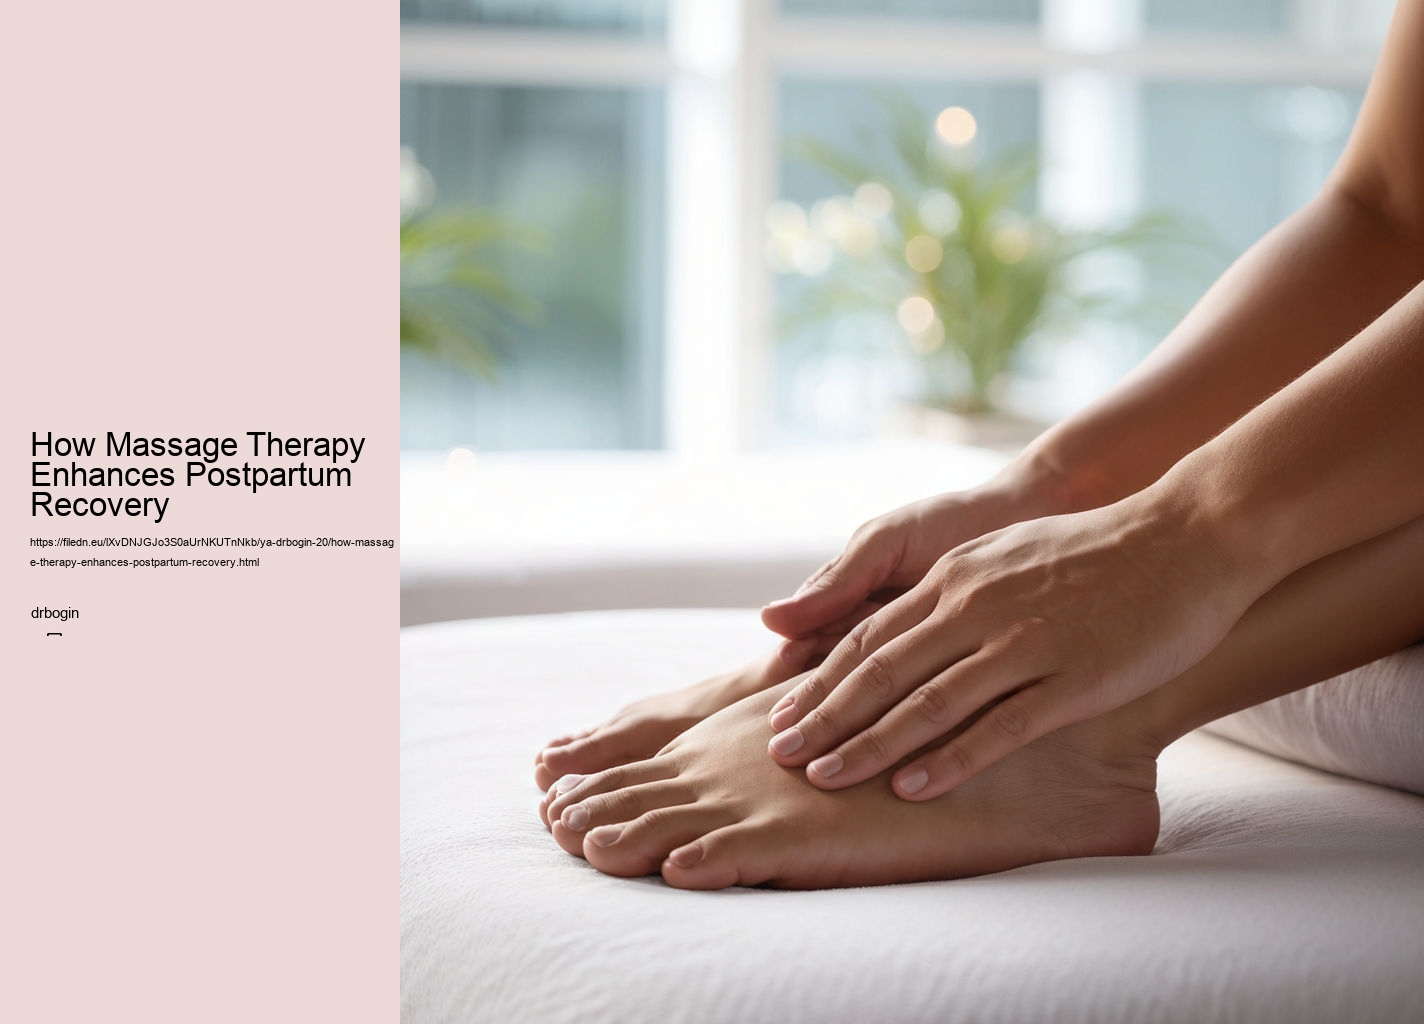 How Massage Therapy Enhances Postpartum Recovery